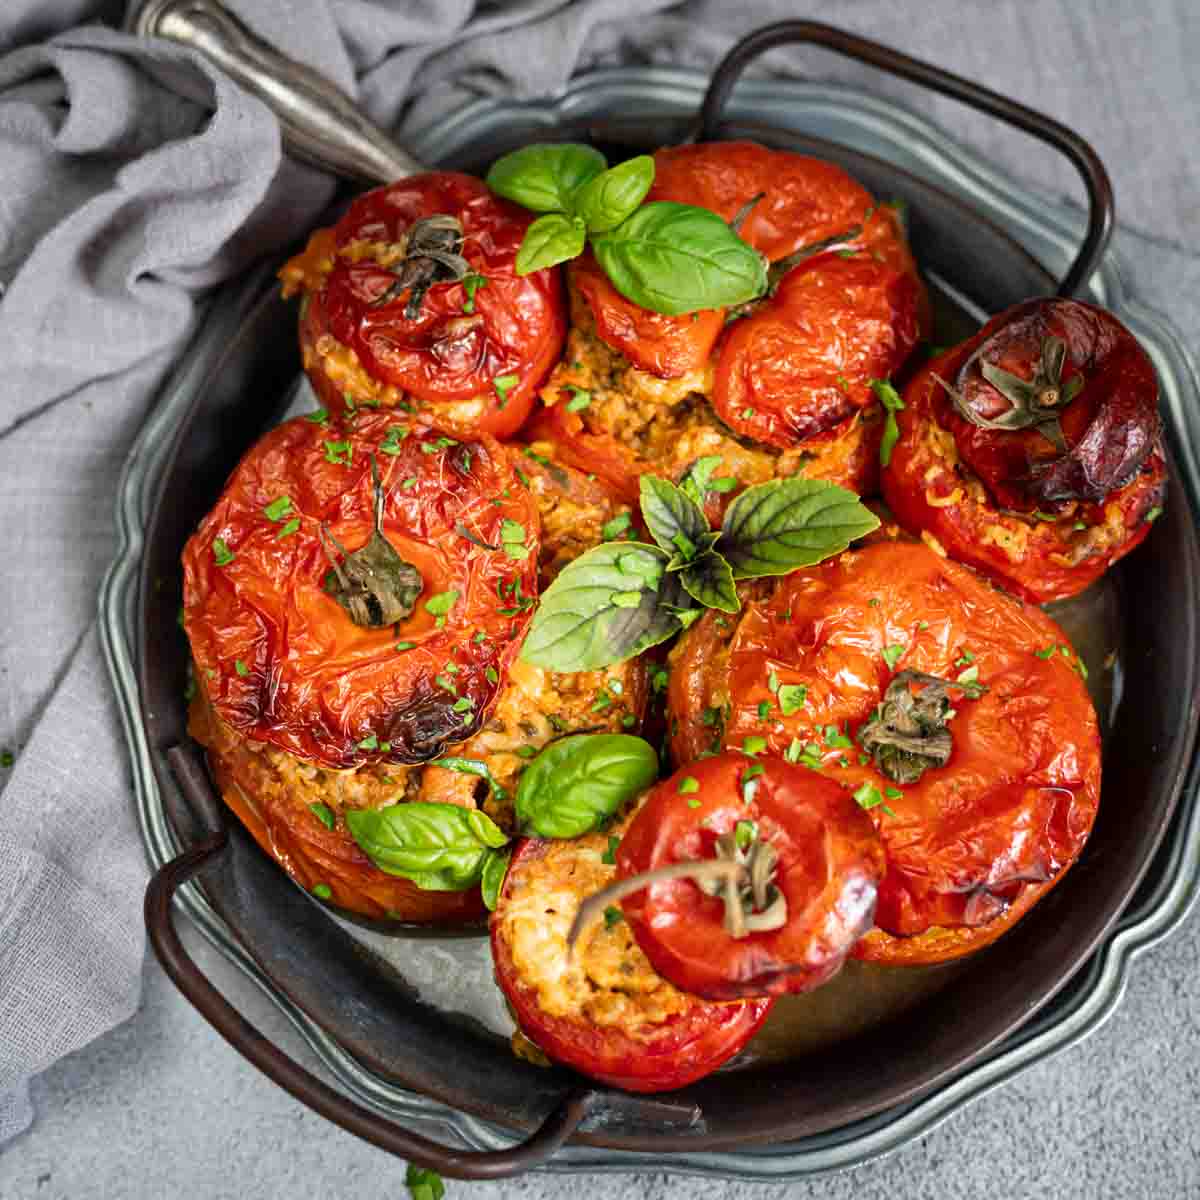 Mince Stuffed Tomatoes served on an old silver rounded plate